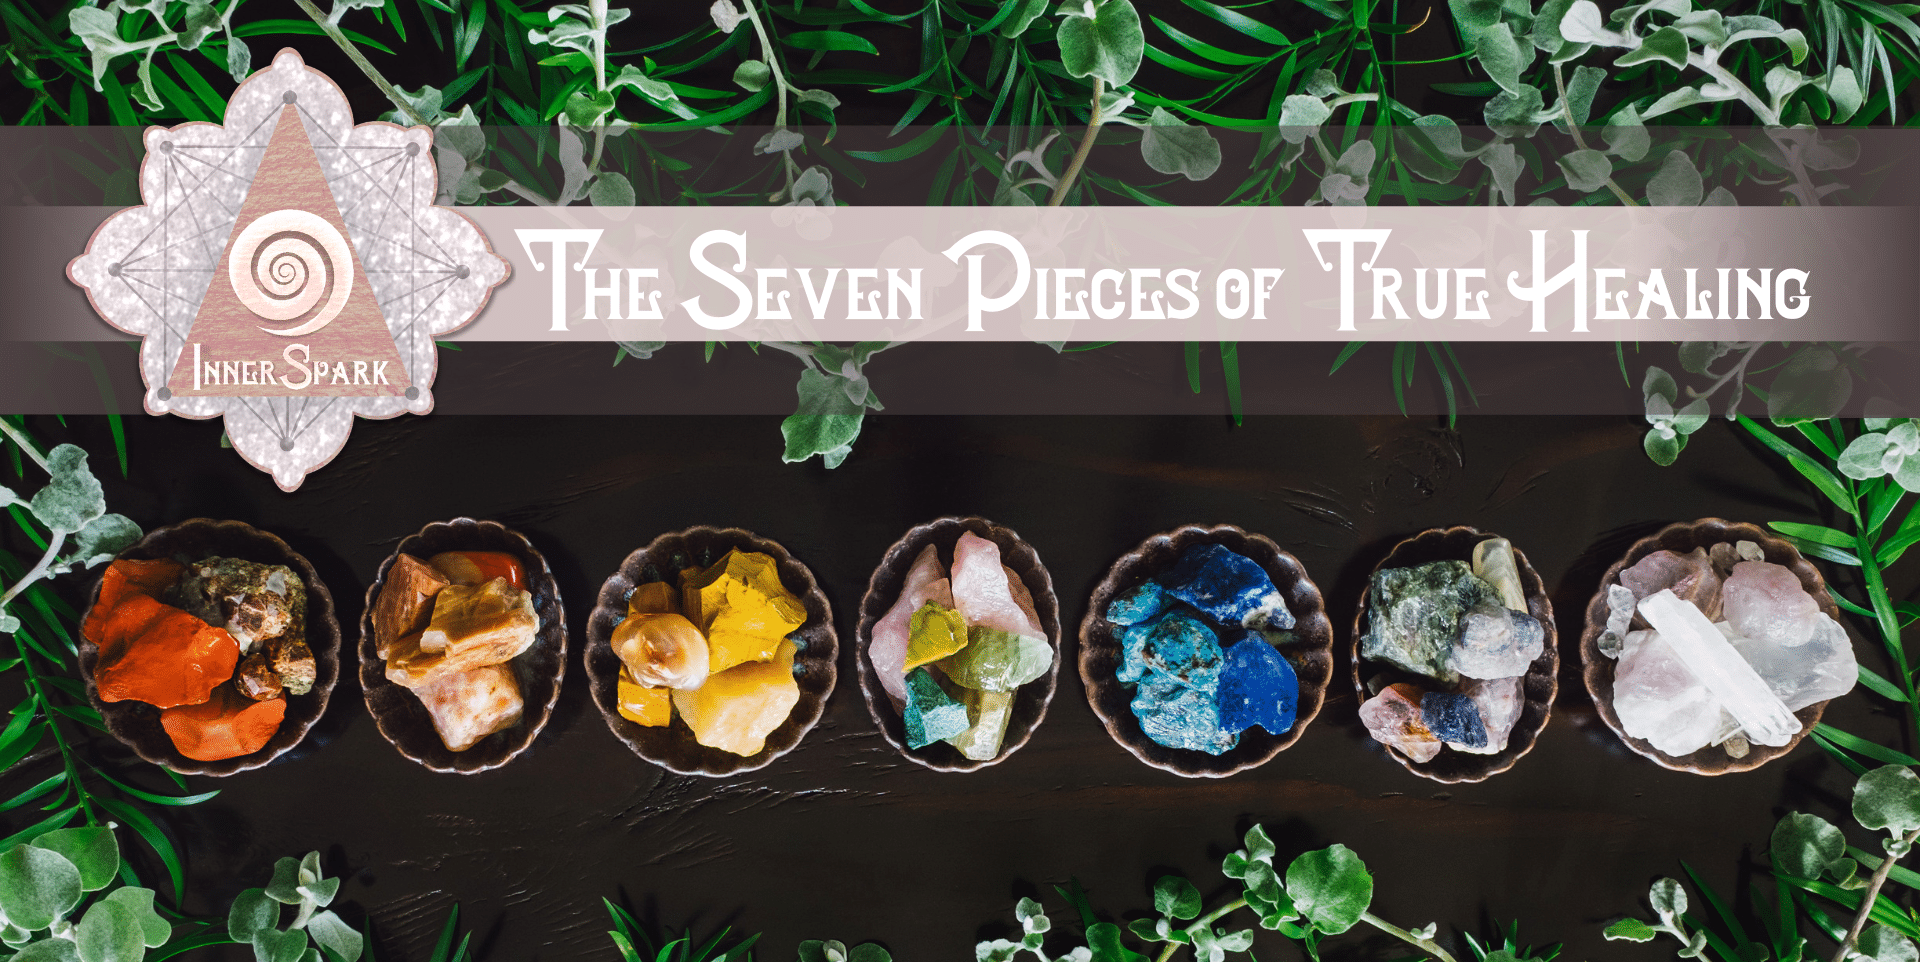 The 7 Pieces of TRUE Healing